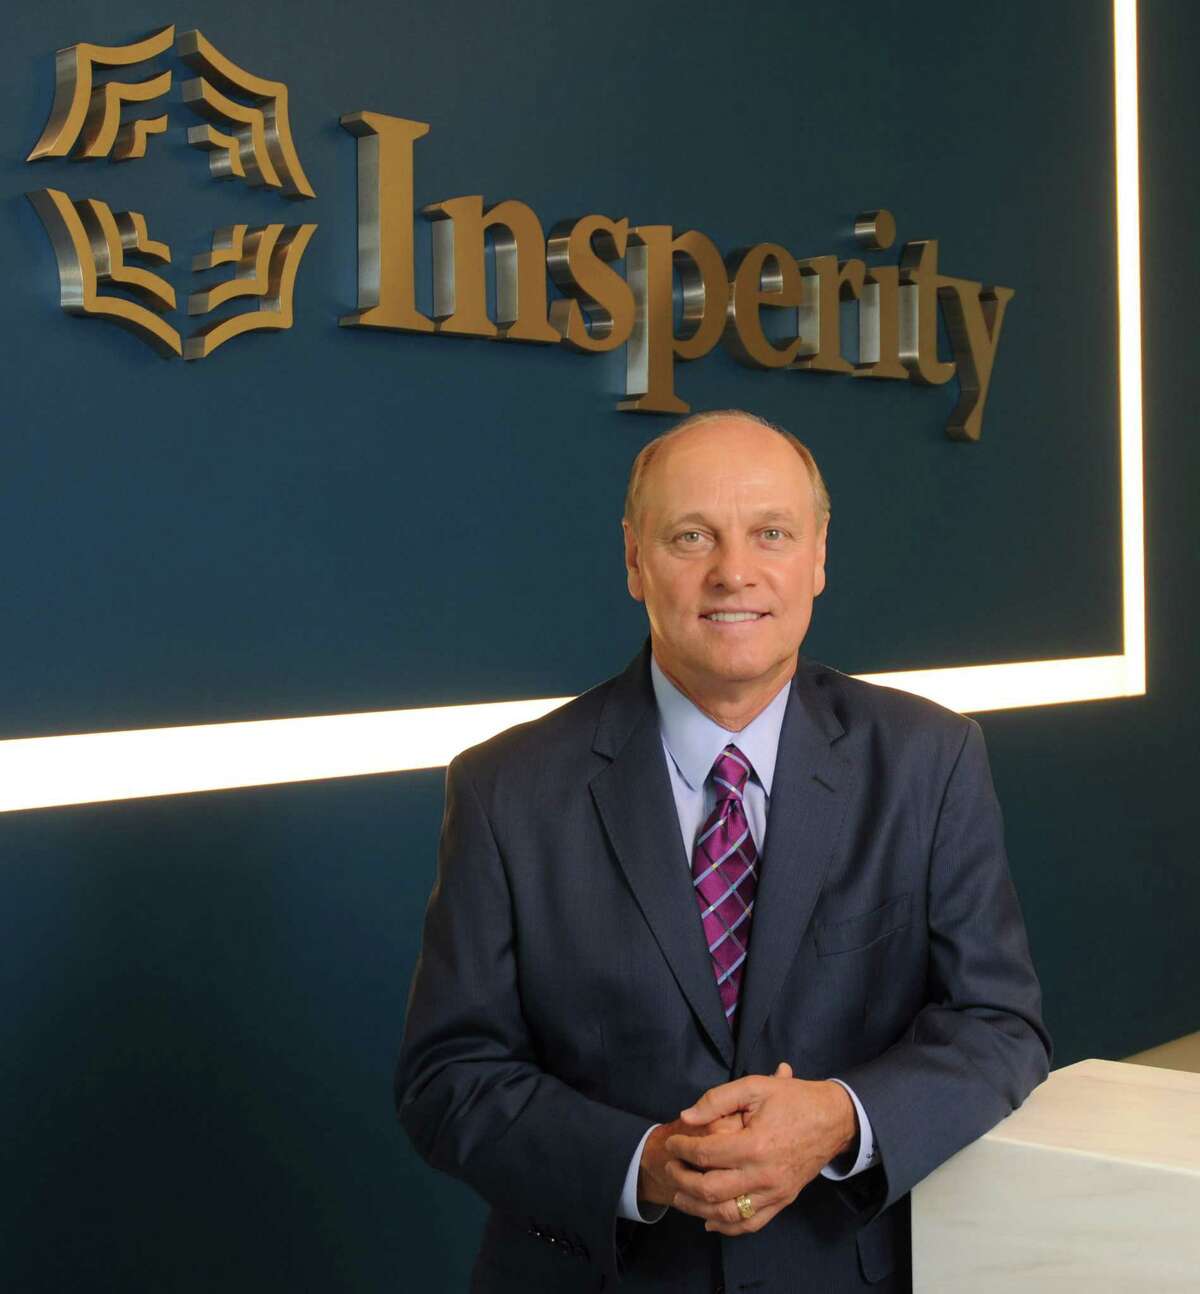 Paul Sarvadi, chairman and CEO of Insperity, at the company's headquarters in Kingwood Thursday May 25, 2017. (Dave Rossman Photo)